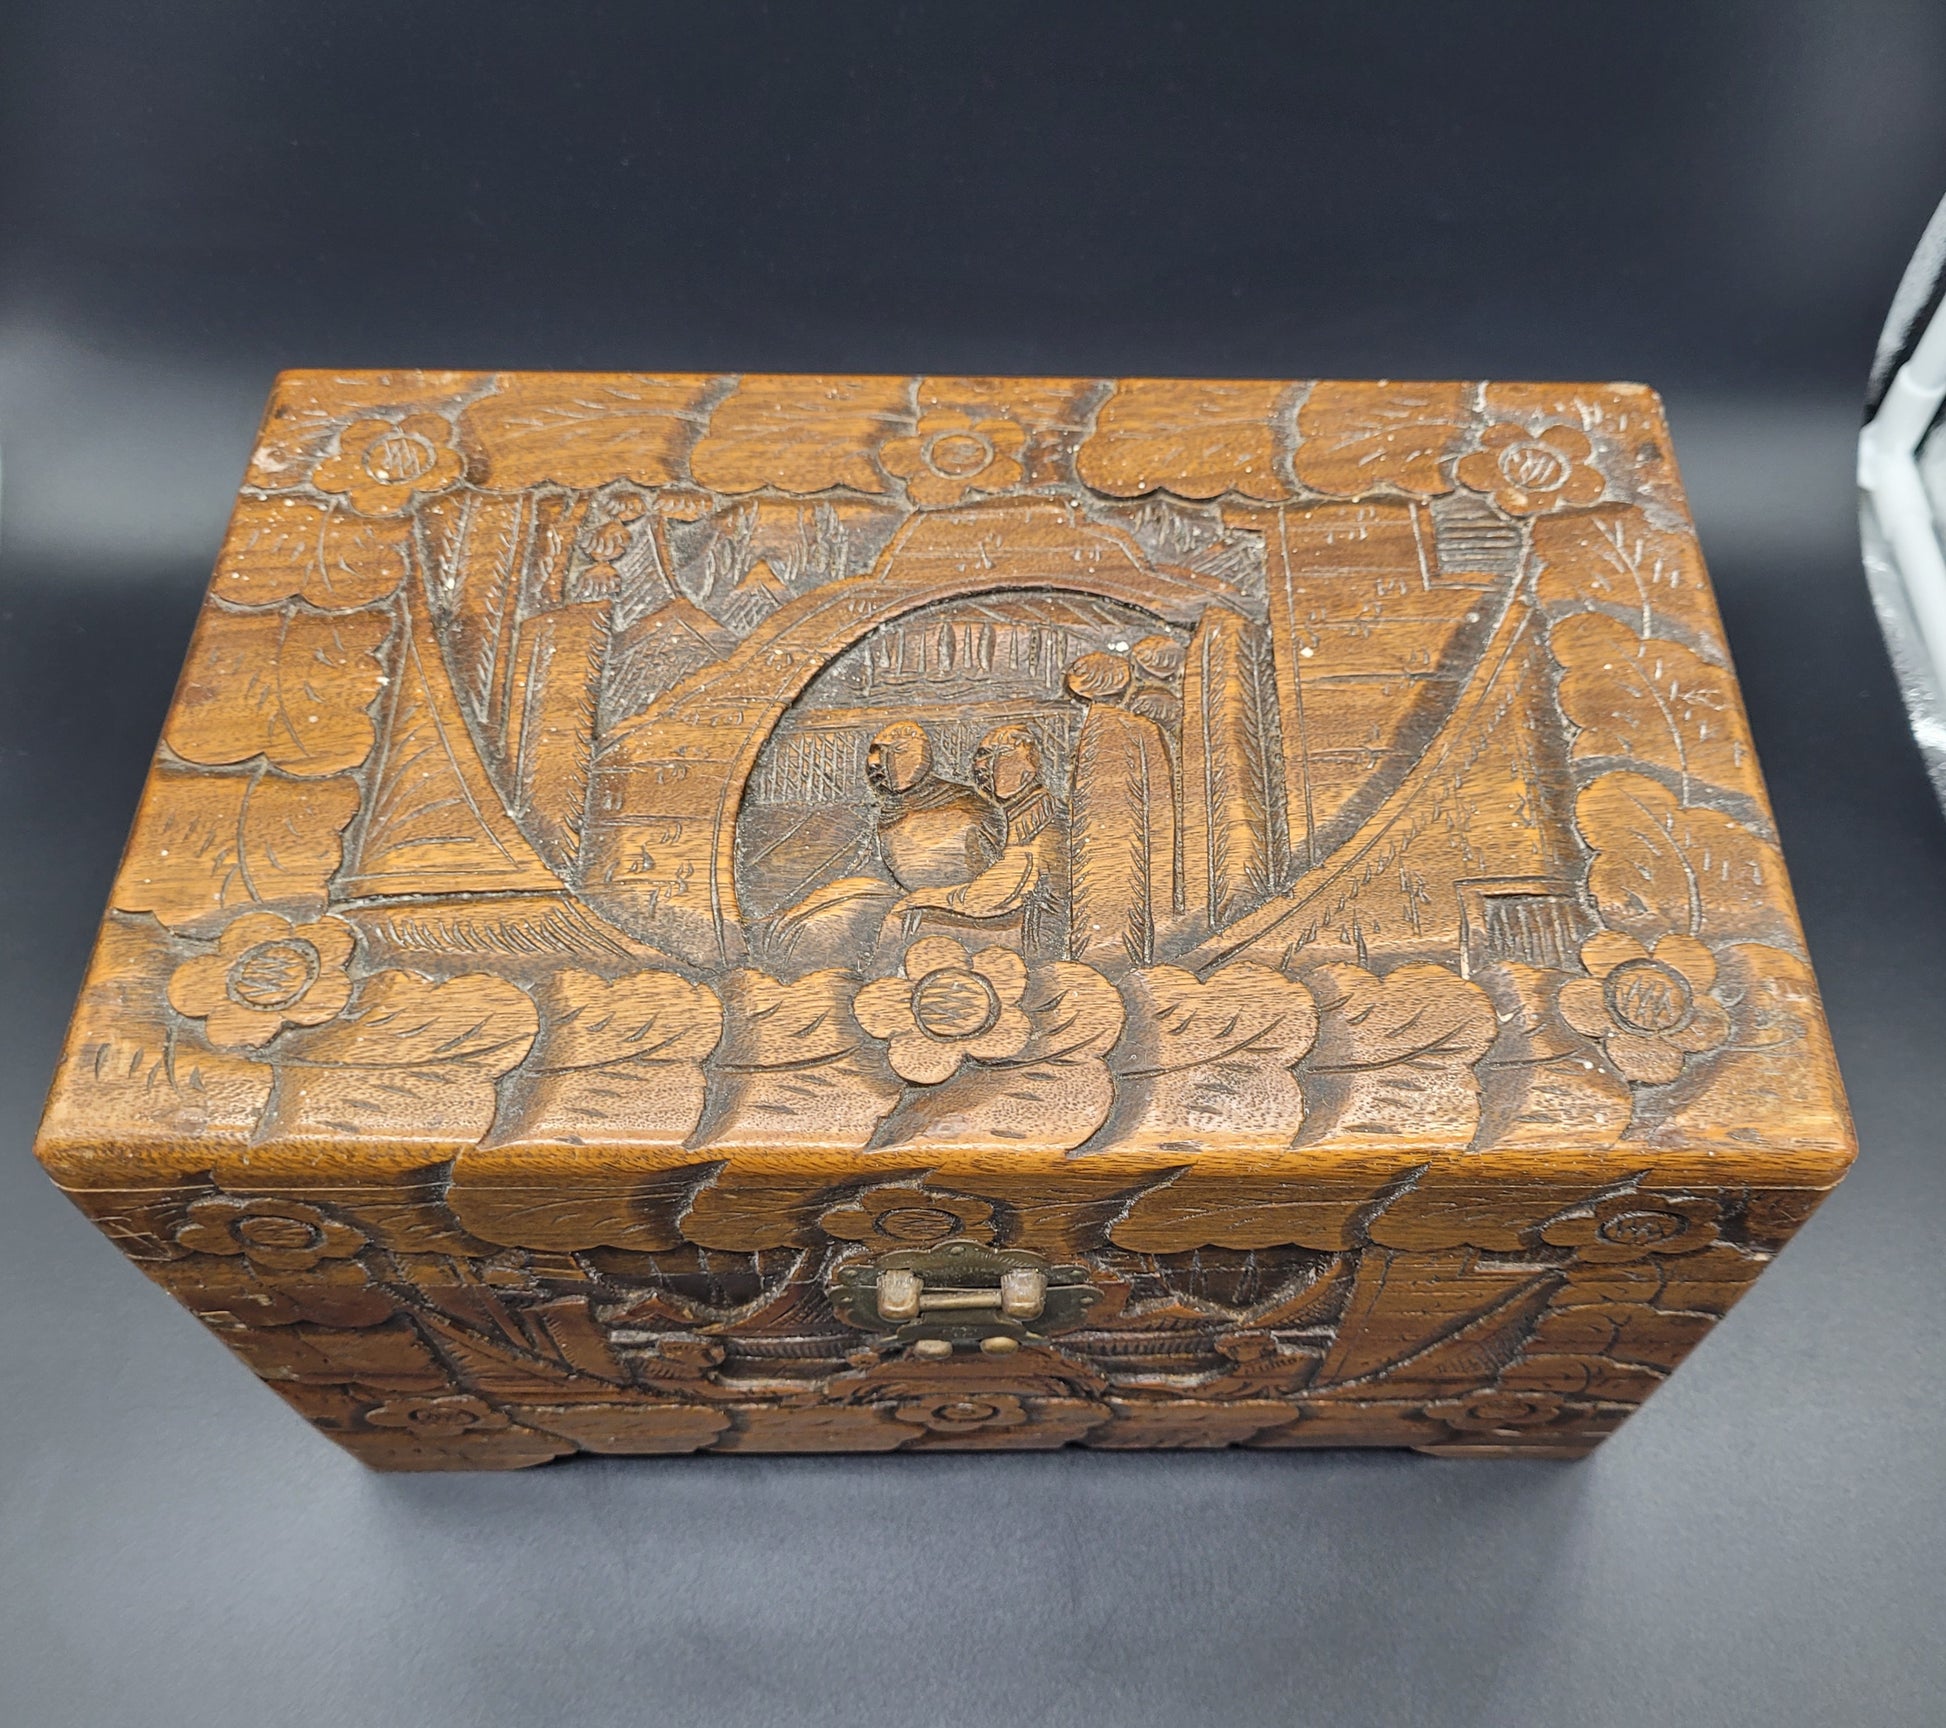  Chinese Carved Wooden Box made in the 19th century 